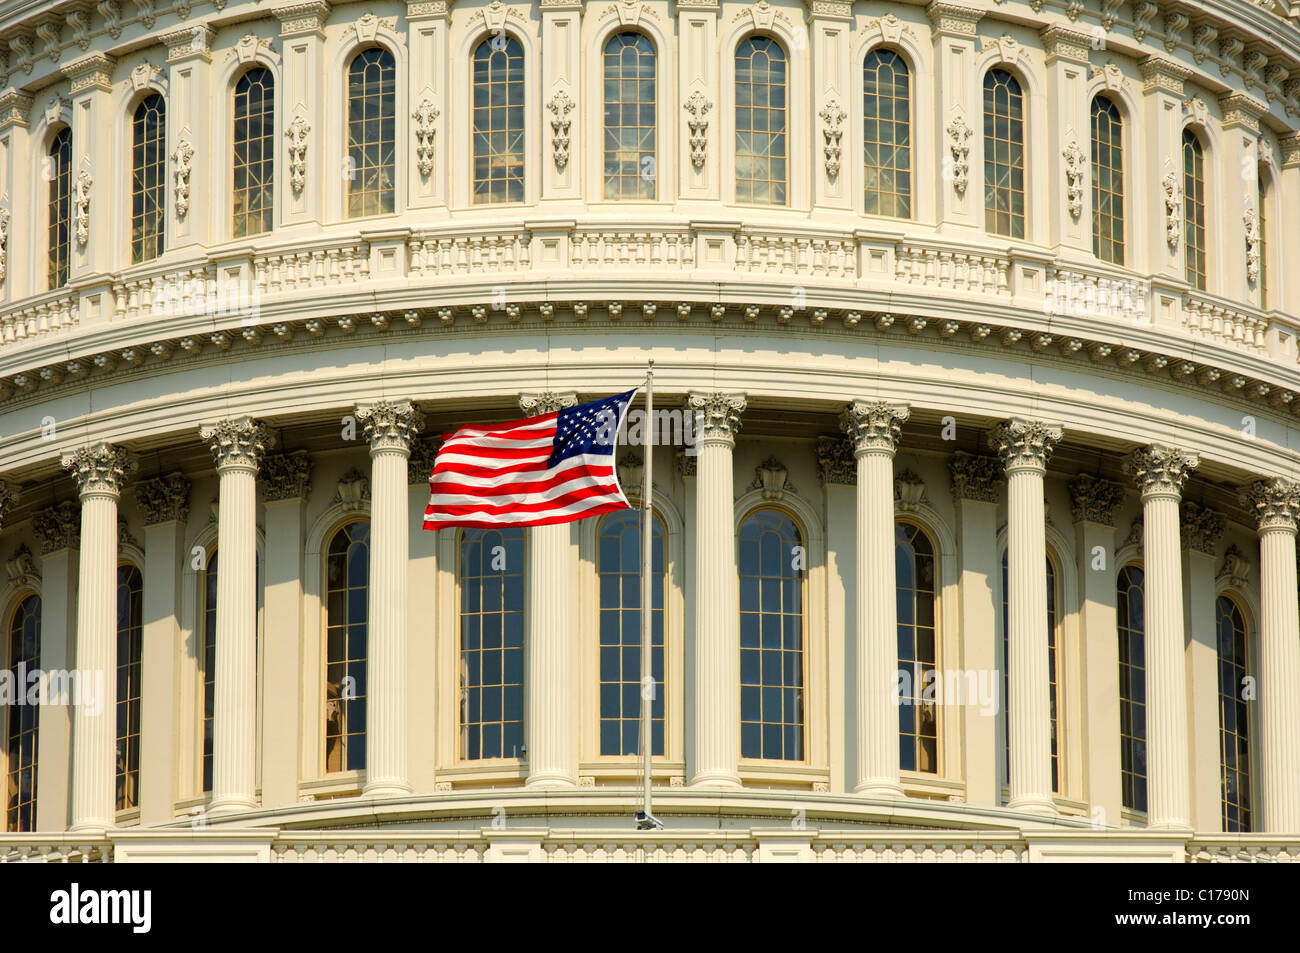 Cupola of the Capitol and the star spangled banner, Washington, D.C., USA Stock Photo